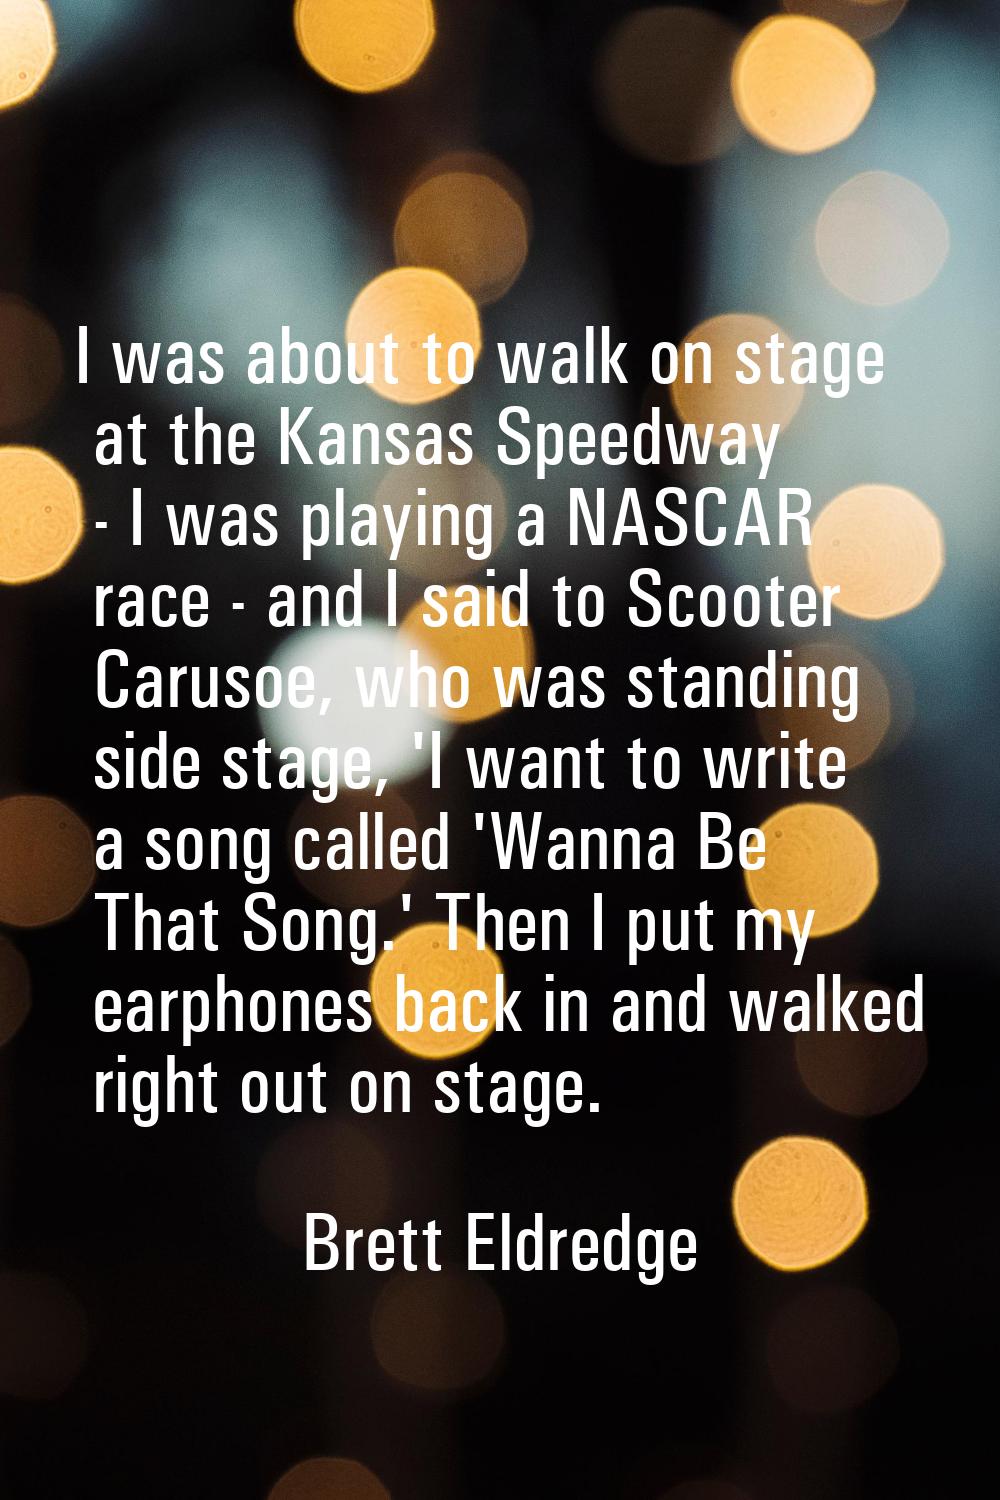 I was about to walk on stage at the Kansas Speedway - I was playing a NASCAR race - and I said to S